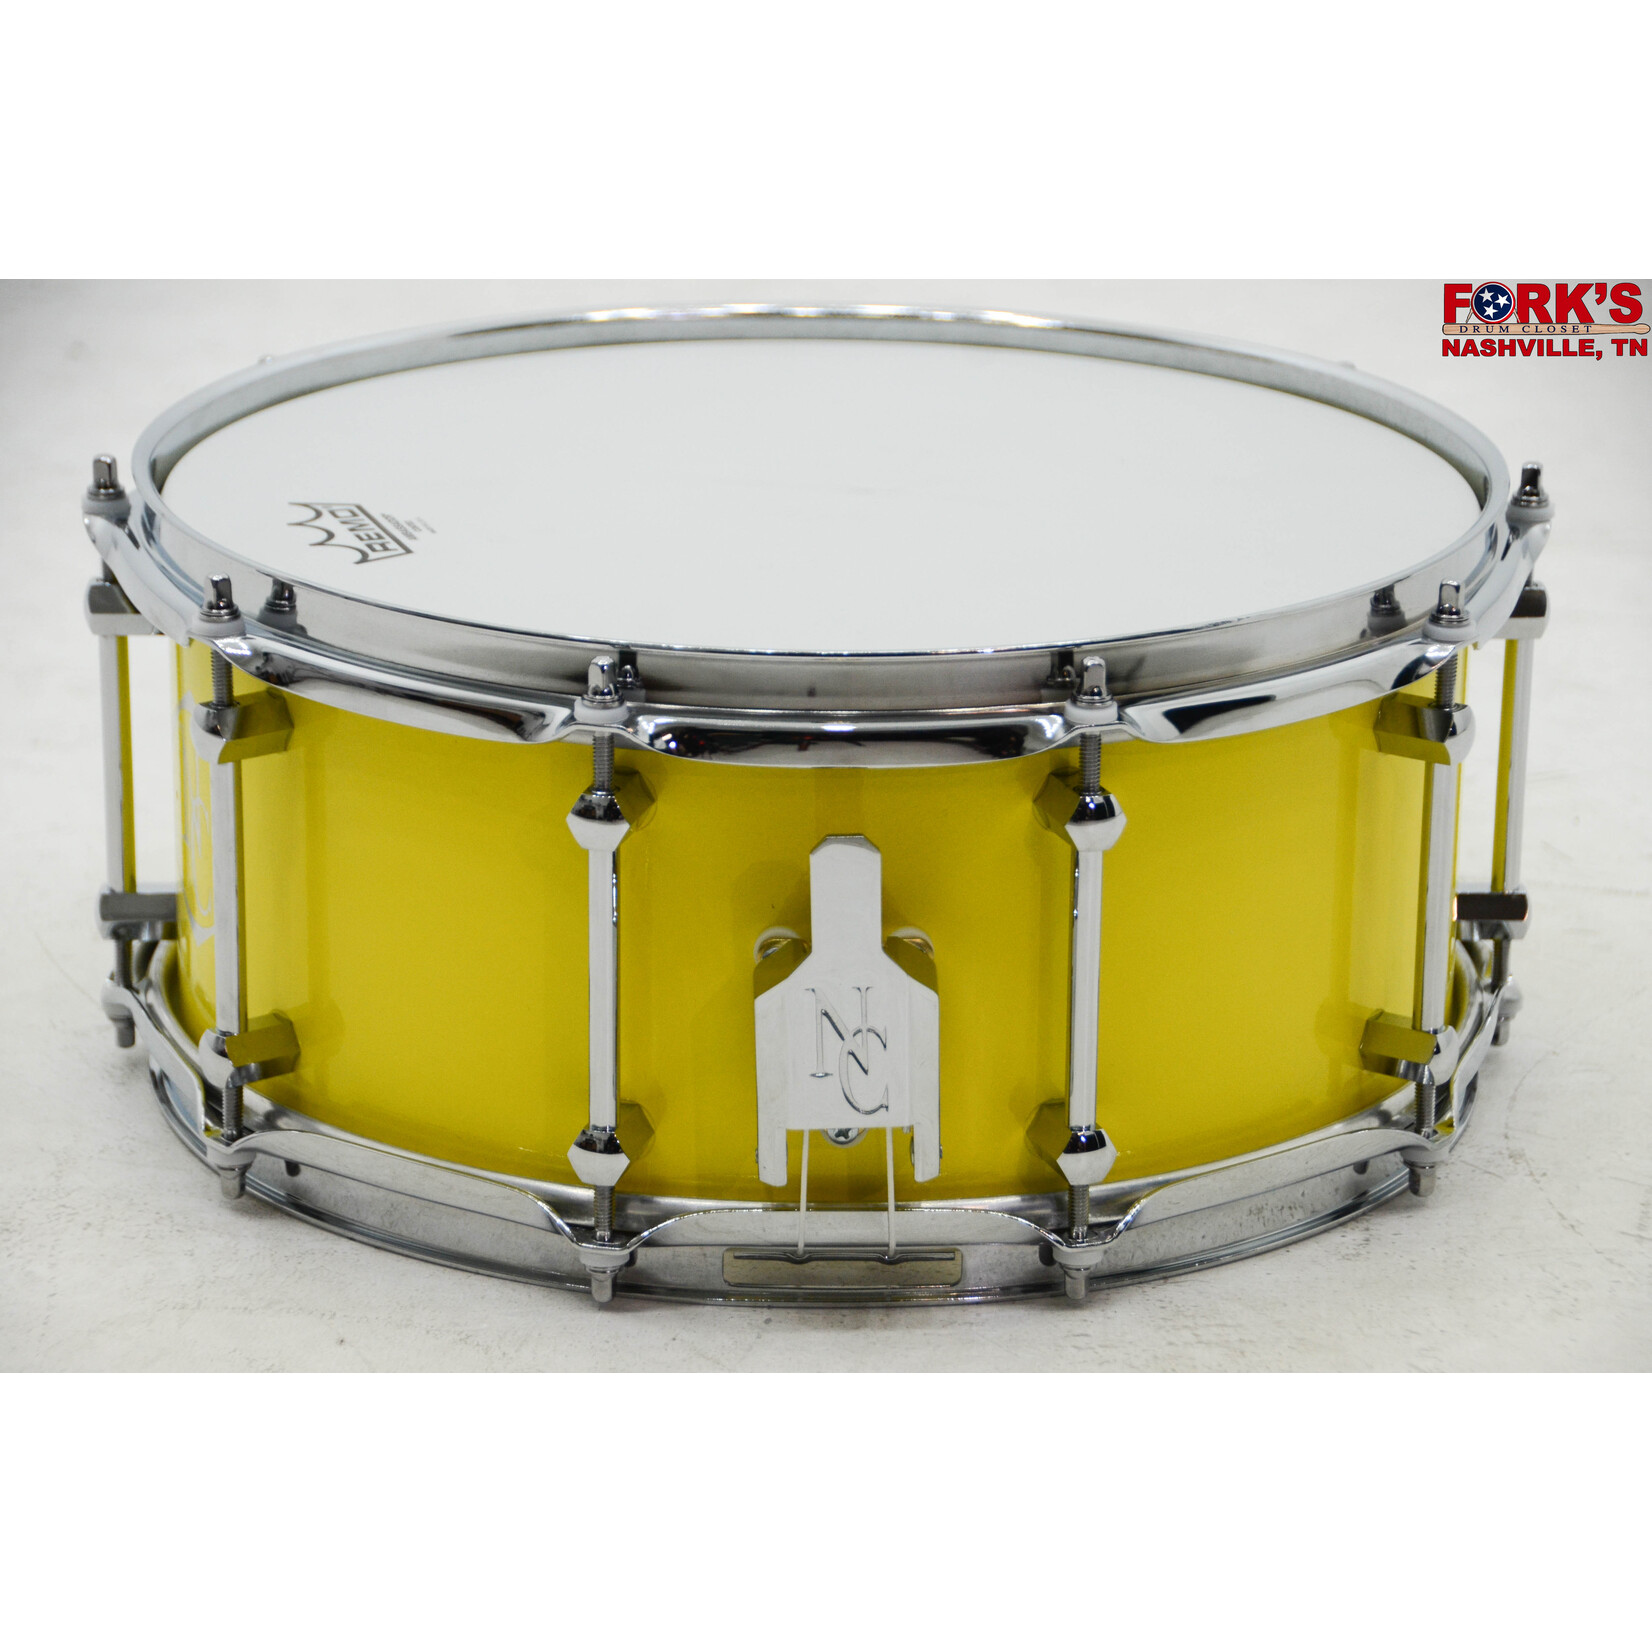 Noble and Cooley Noble and Cooley Alloy Classic 6x14 Snare Drum - "Yellow Powder Coat"